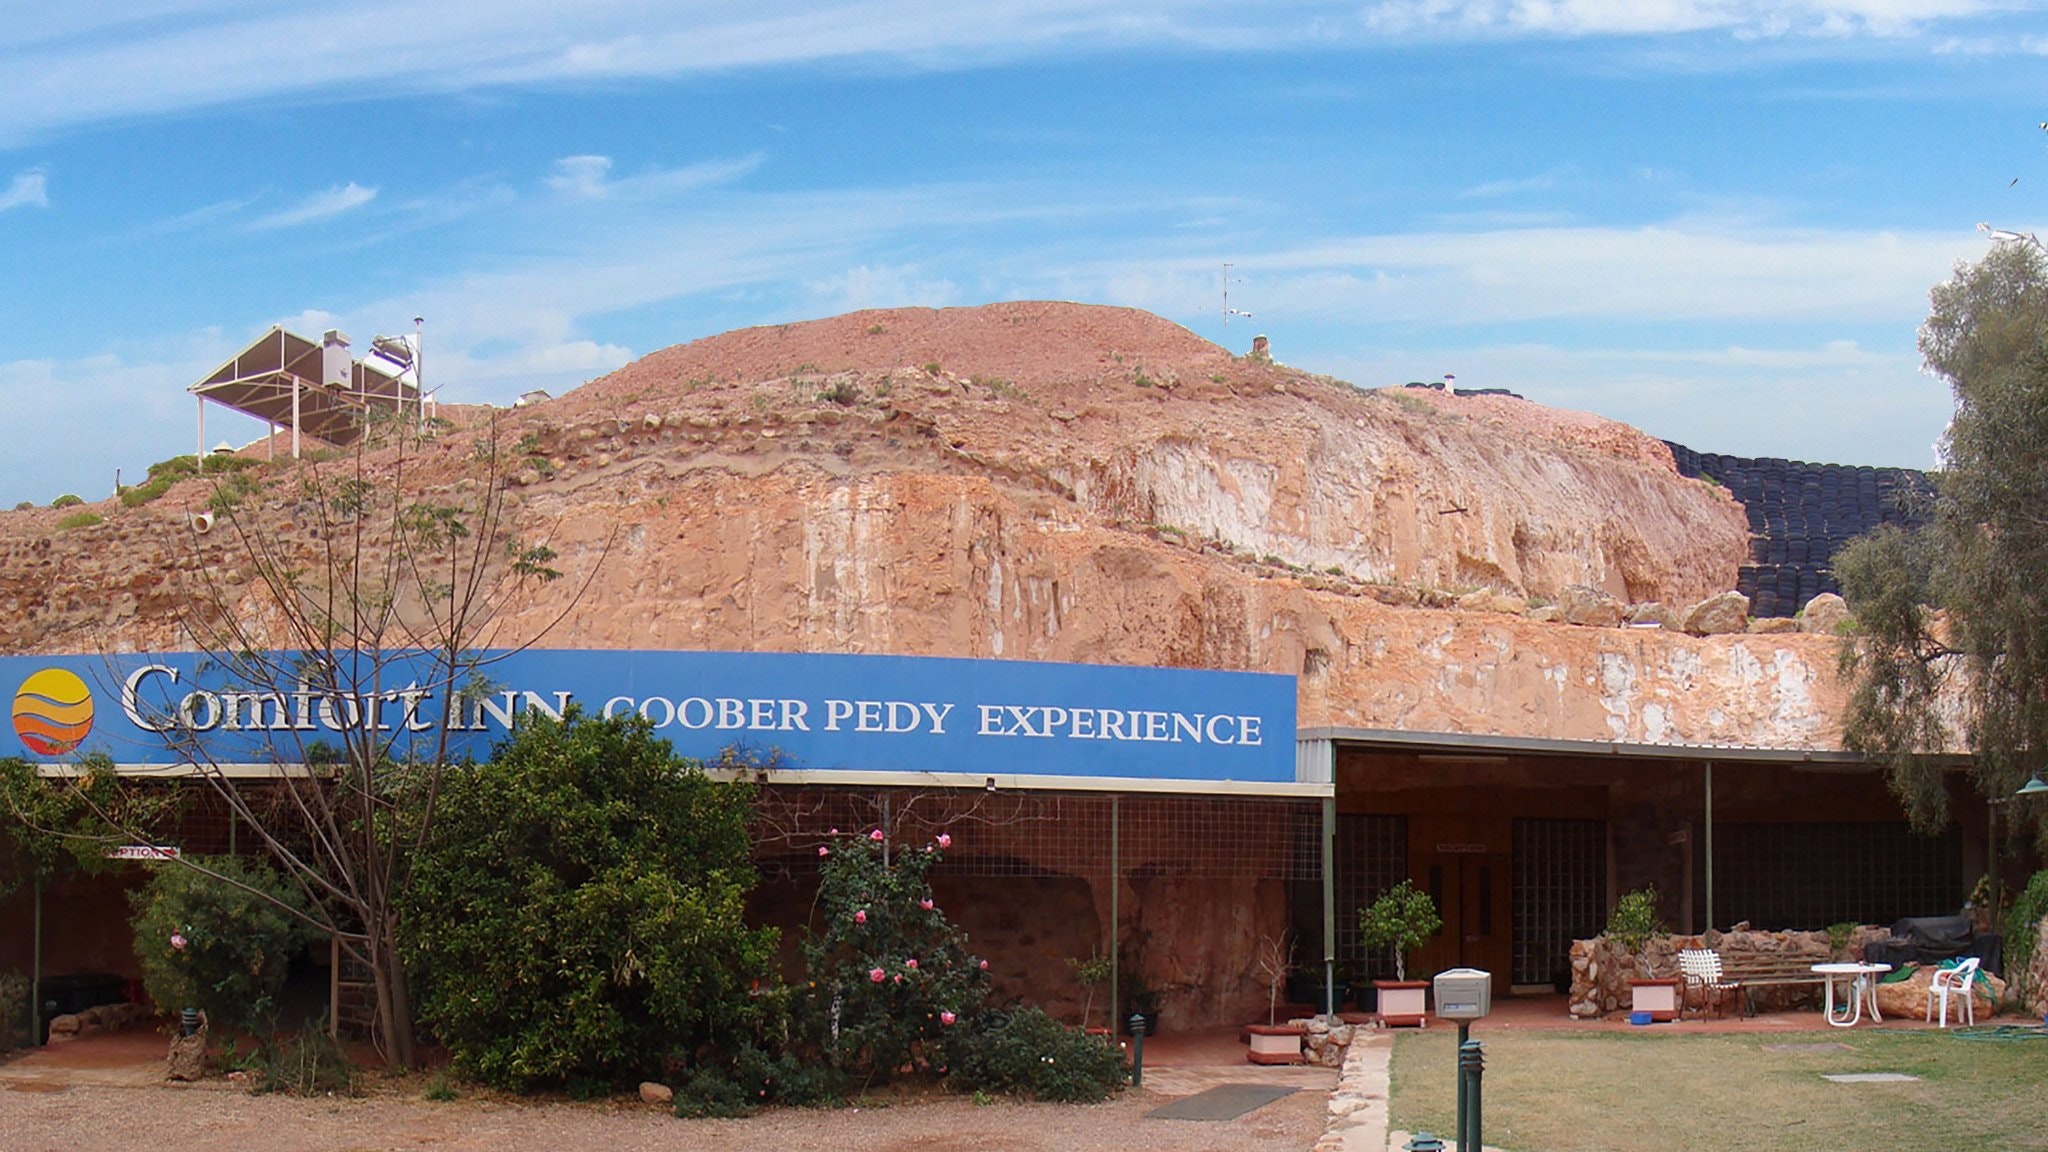 Comfort Inn Coober Pedy Experience Motel - Stayed